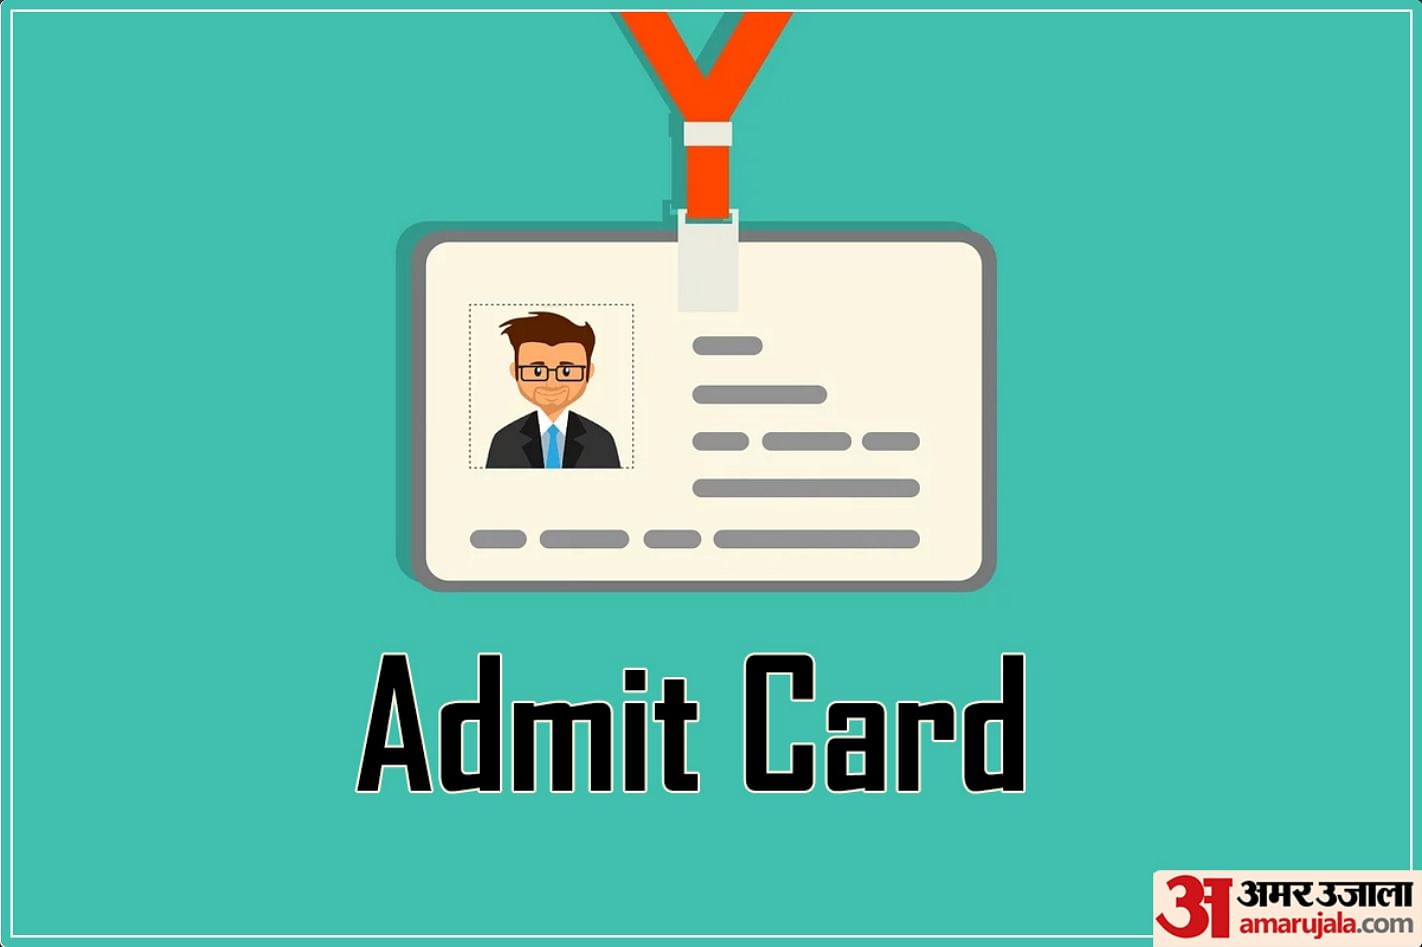 BPSSC Bihar Police SI Mains Admit Card 2023 Released at bpssc.bih.nic.in, How to Download